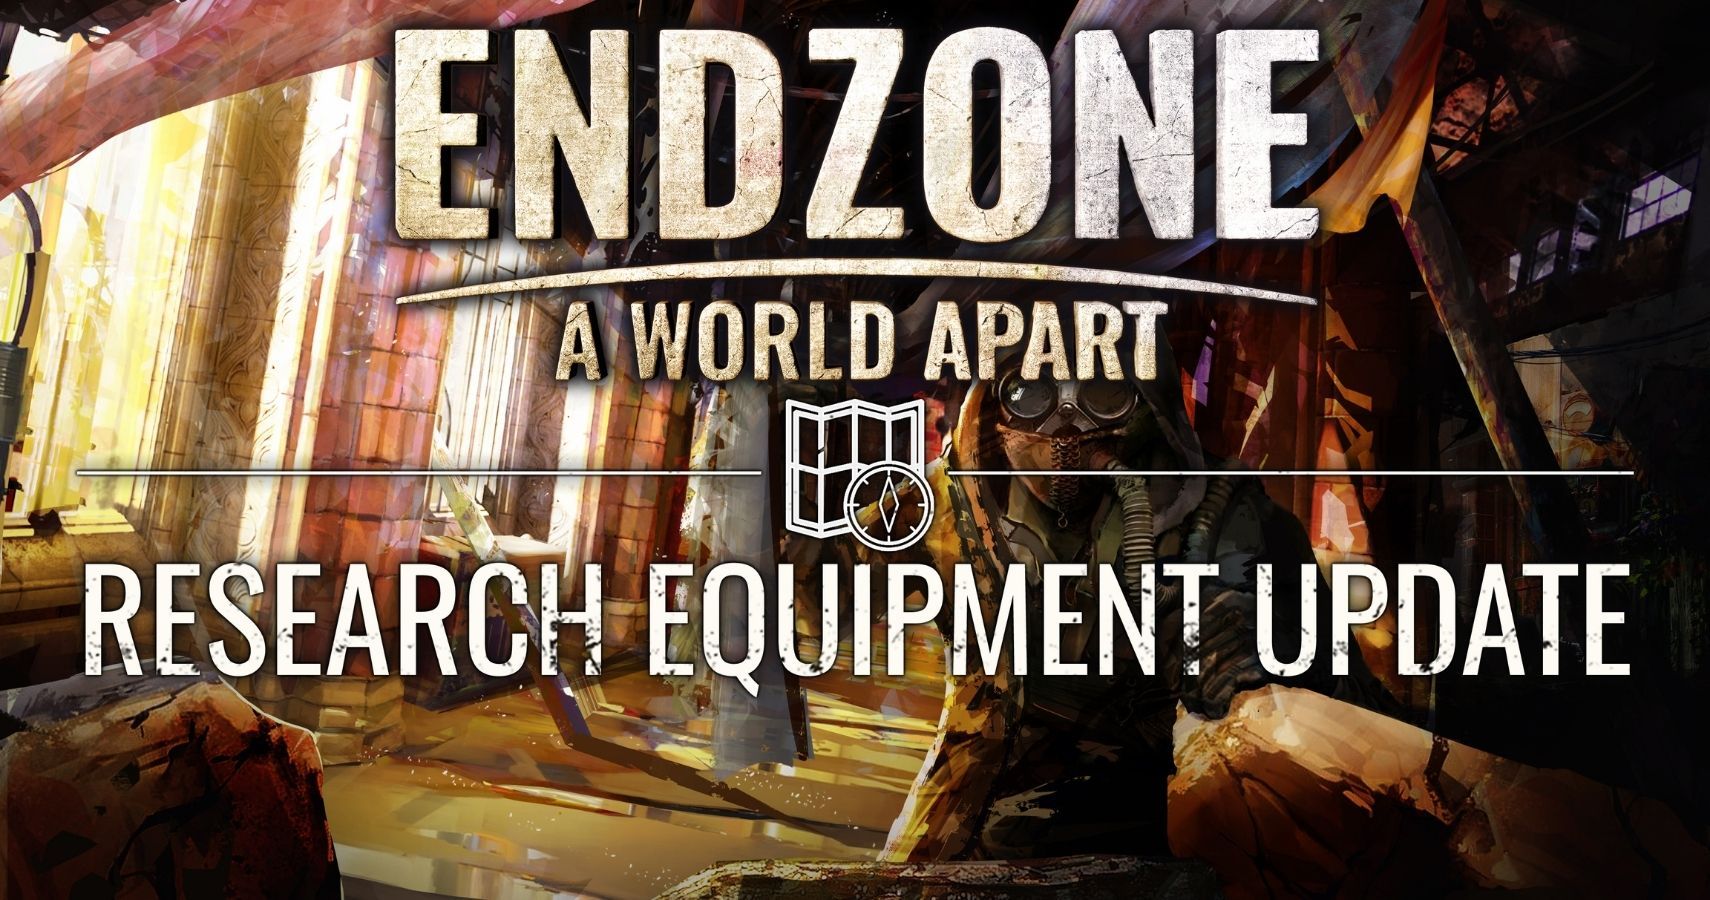 Endzone Research Equipment Update feature image